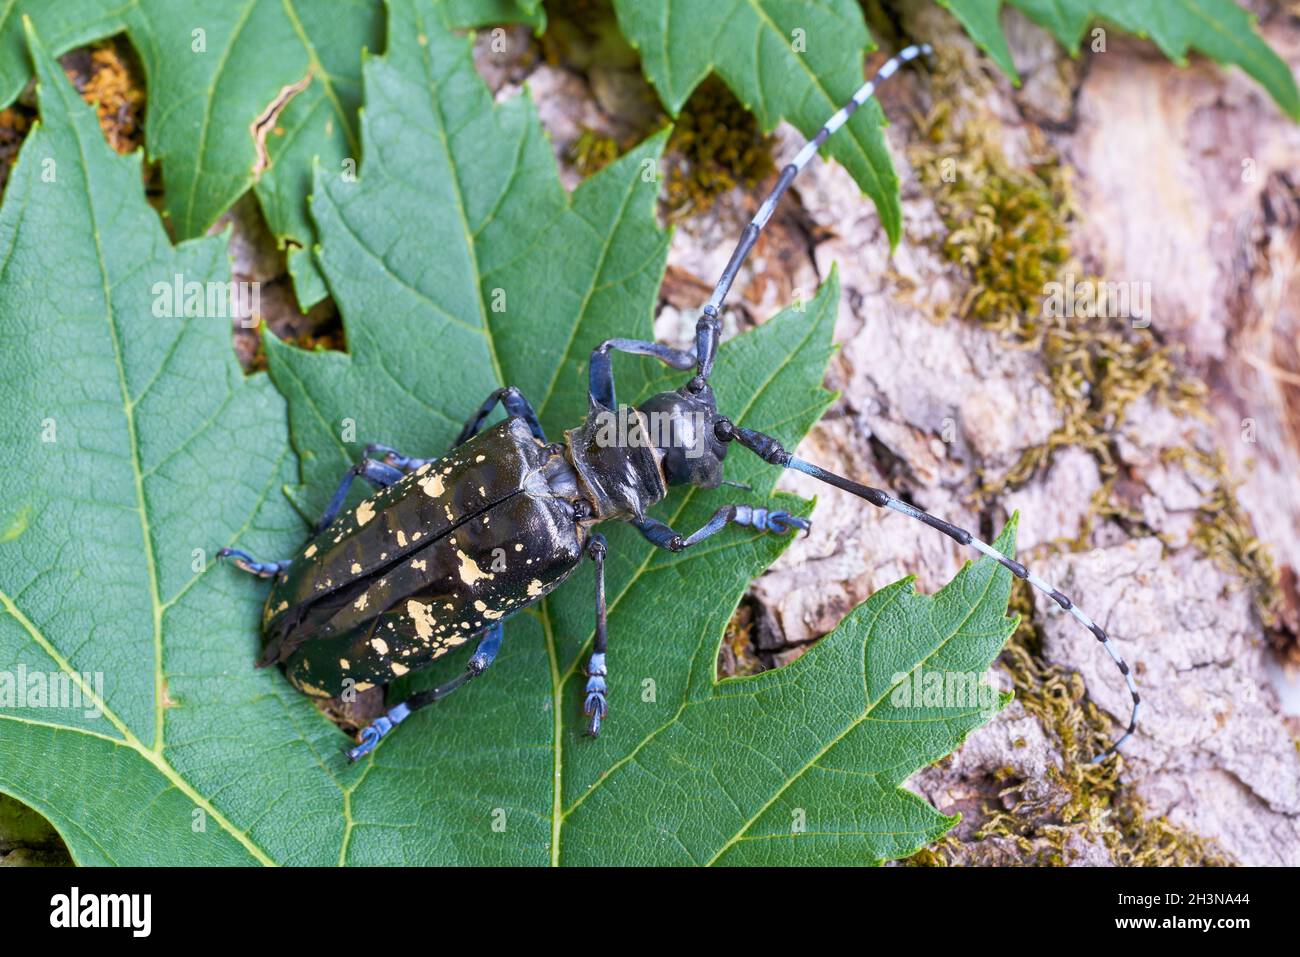 Asian longhorn beetle (Anoplophora glabripennis) with rare yellowing of the points Stock Photo